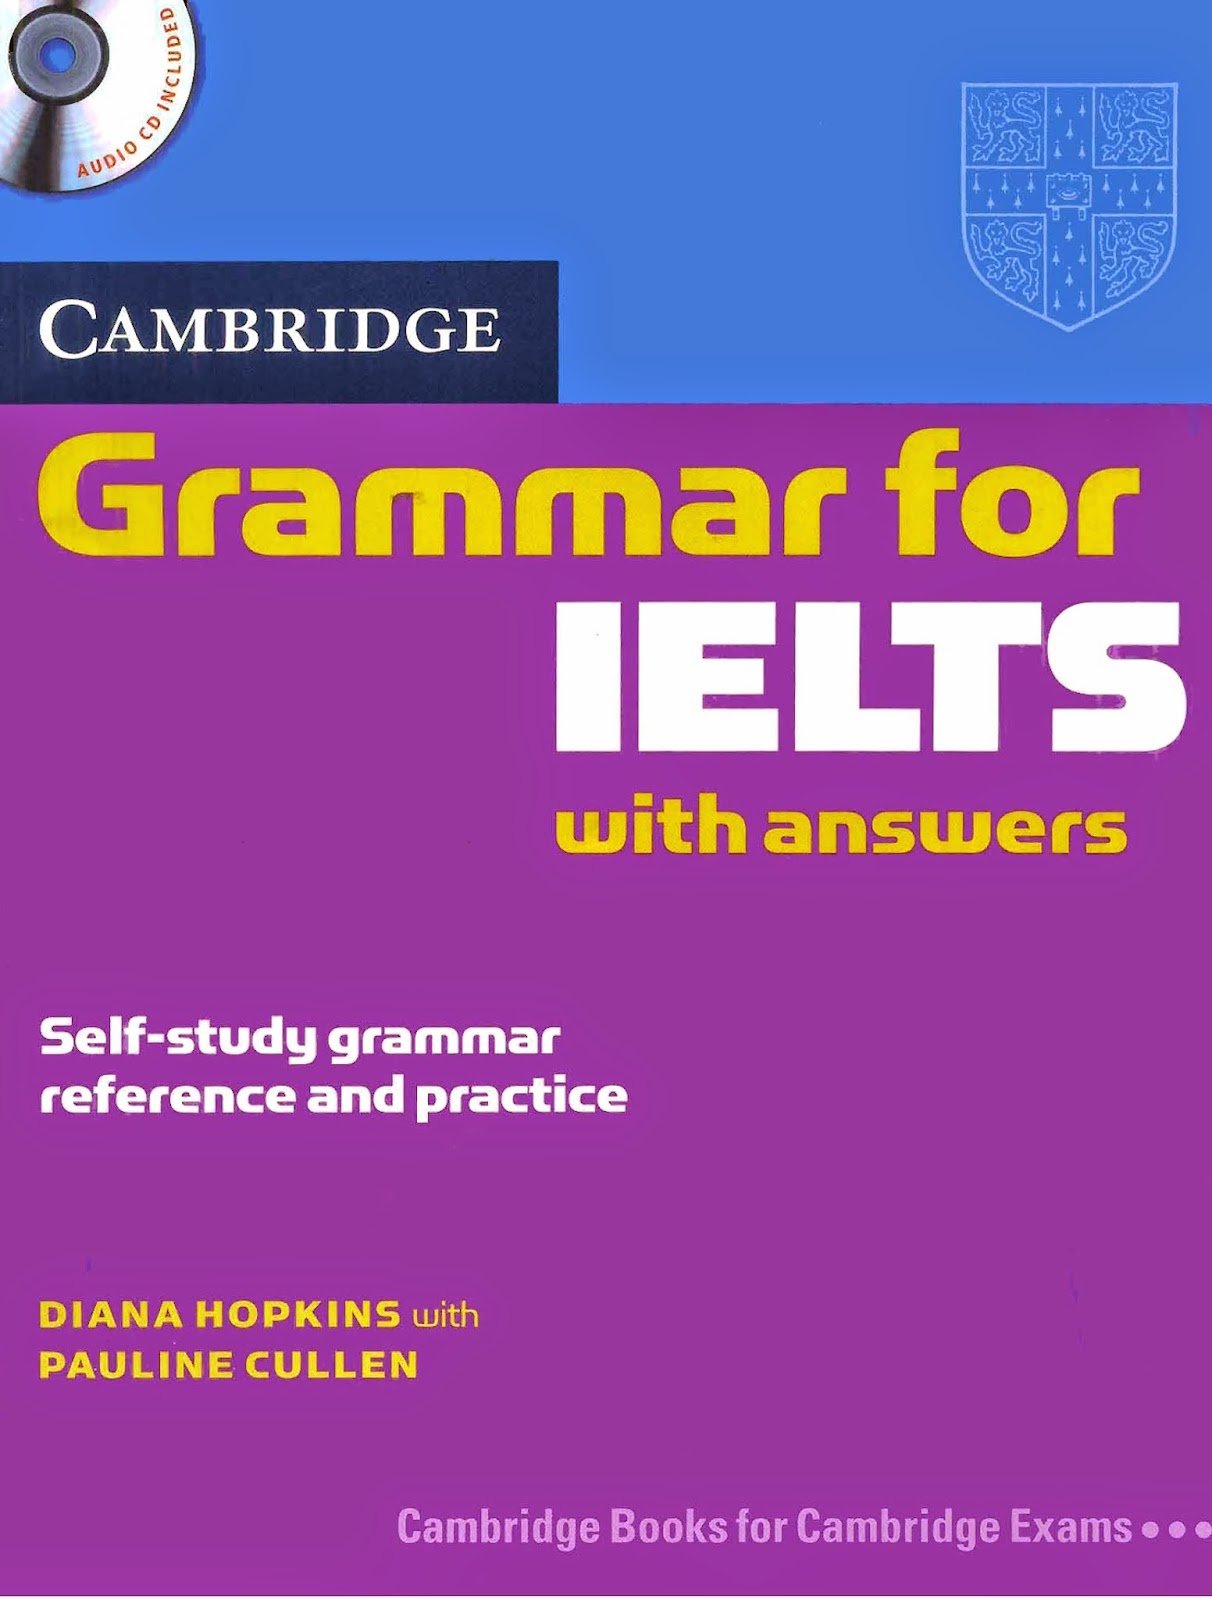 Cambridge Grammar for IELTS with Answers